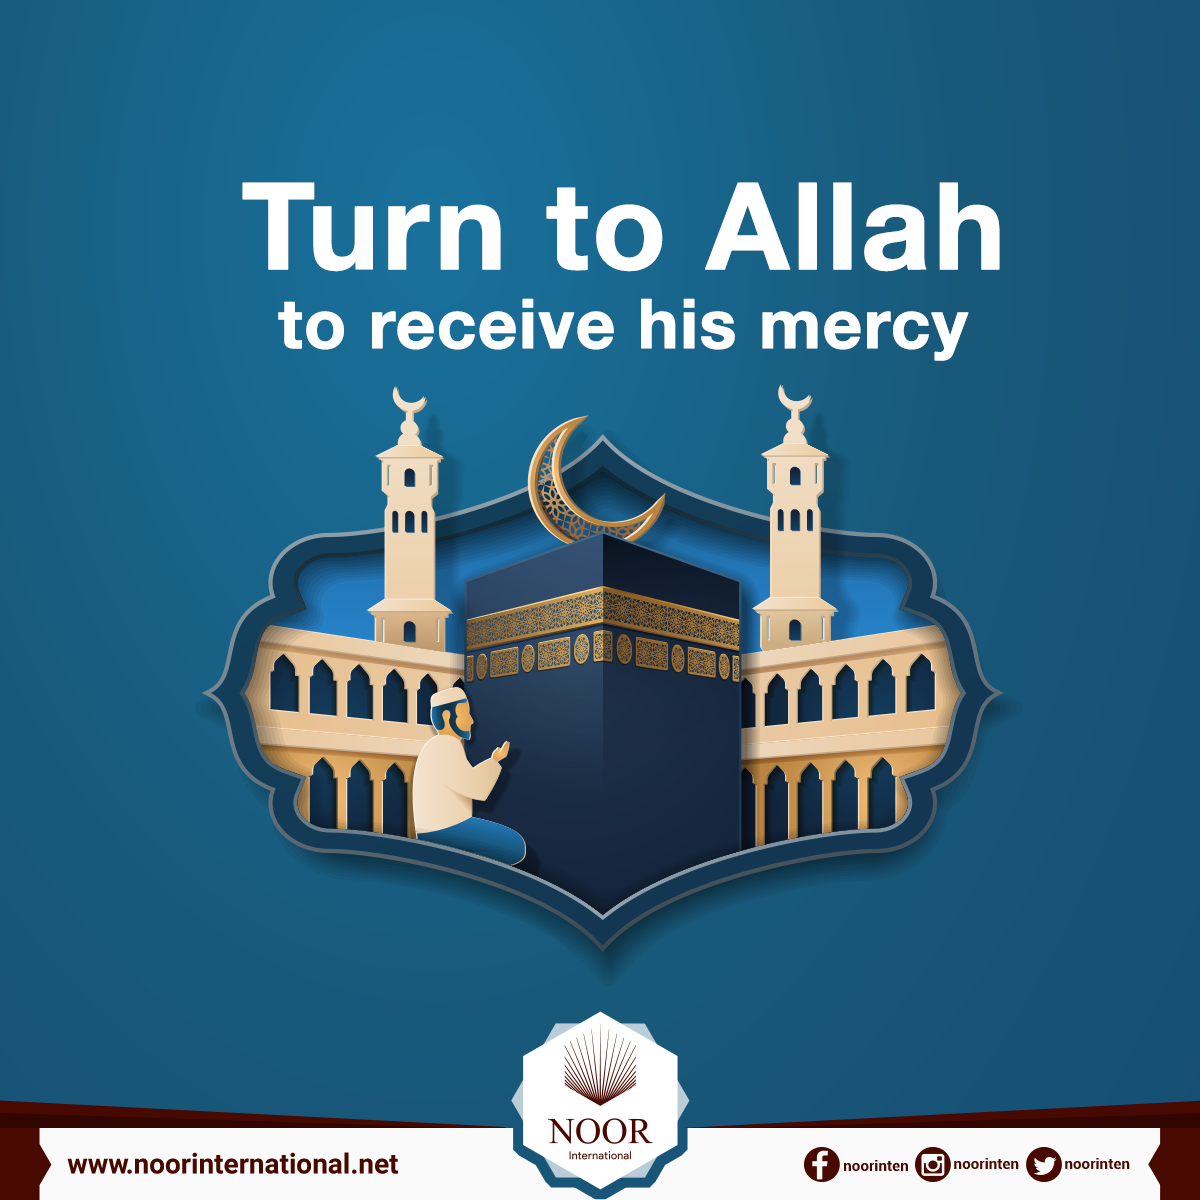 Turn to Allah to receive his mercy